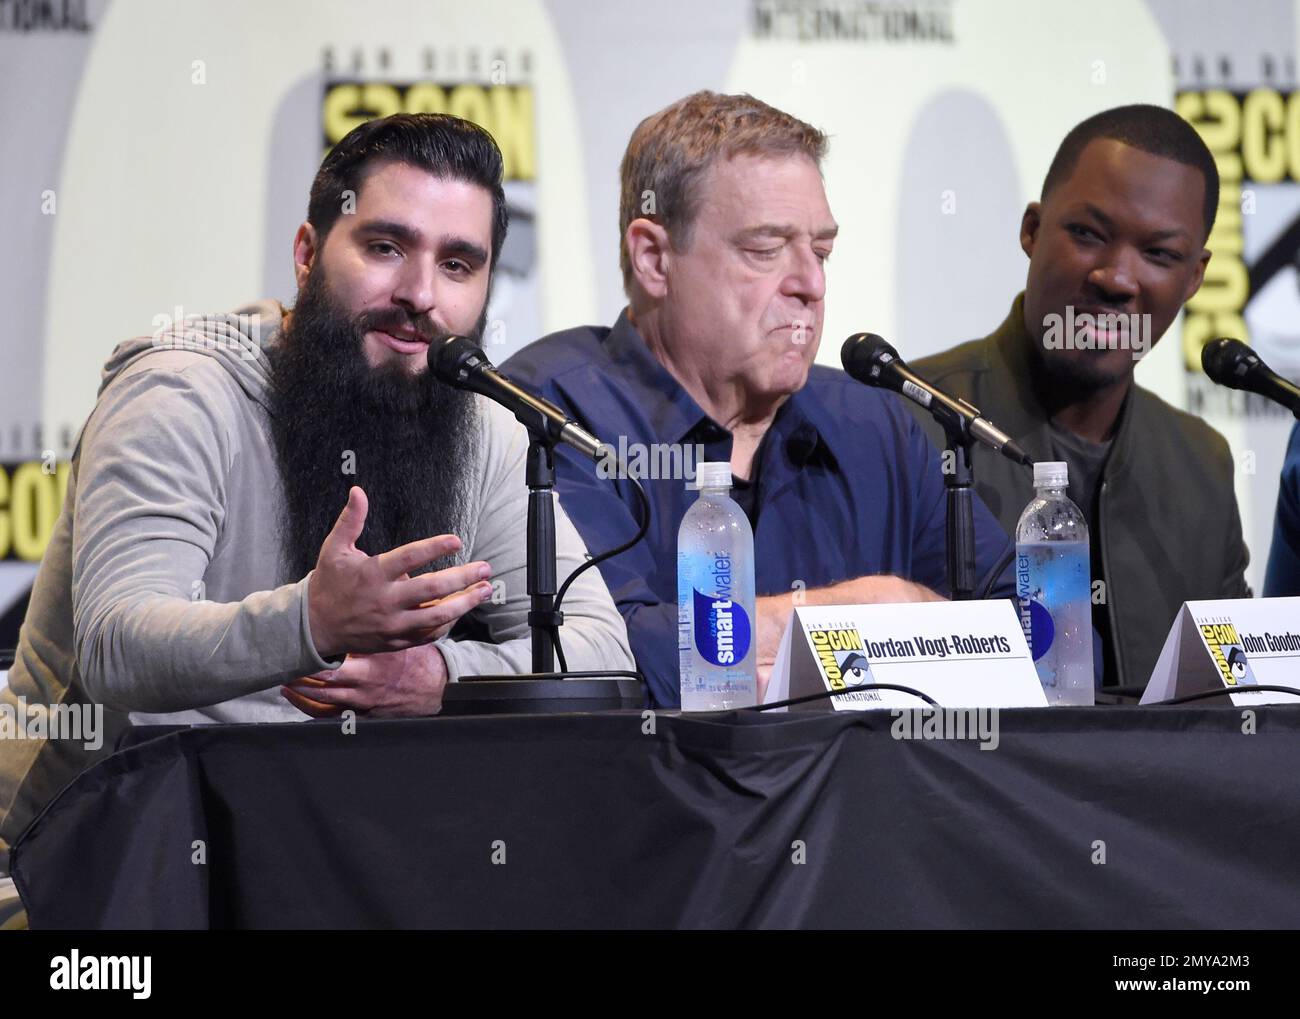 Director Jordan Vogt-Roberts, from left, and actors John Goodman, and Corey Hawkins attend the "Kong: Skull Island" panel on day 3 of Comic-Con International on Saturday, July 23, 2016, in San Diego. (Photo by Chris Pizzello/Invision/AP)